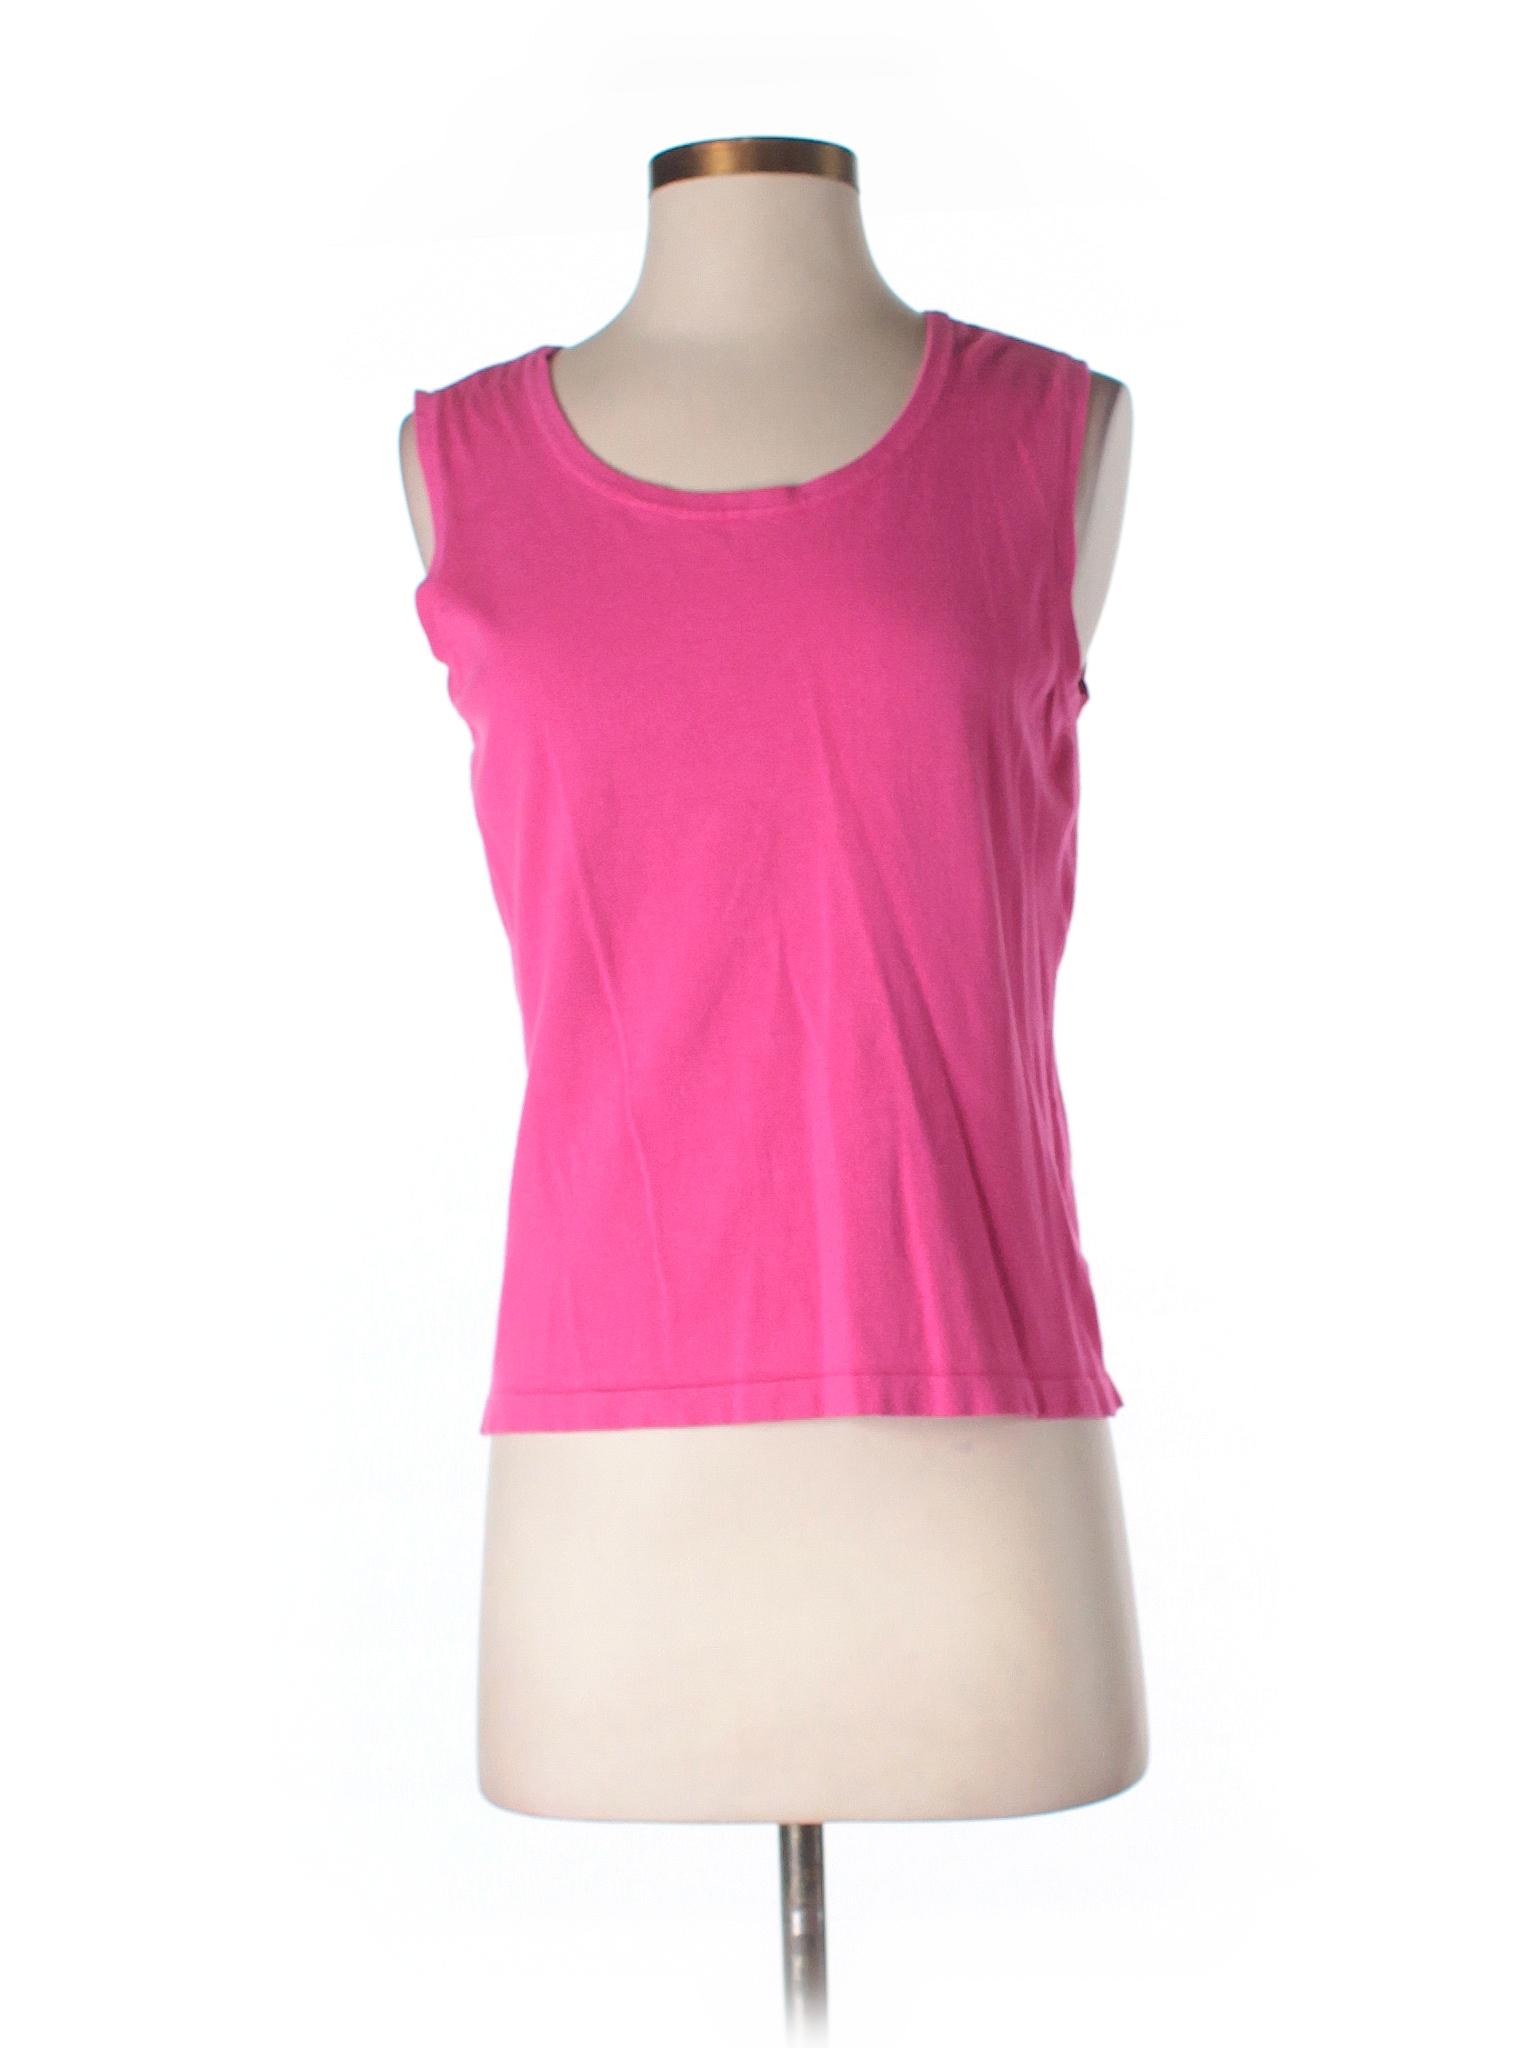 Laura Ashley Solid Pink Tank Top Size S (Petite) - 83% off | thredUP